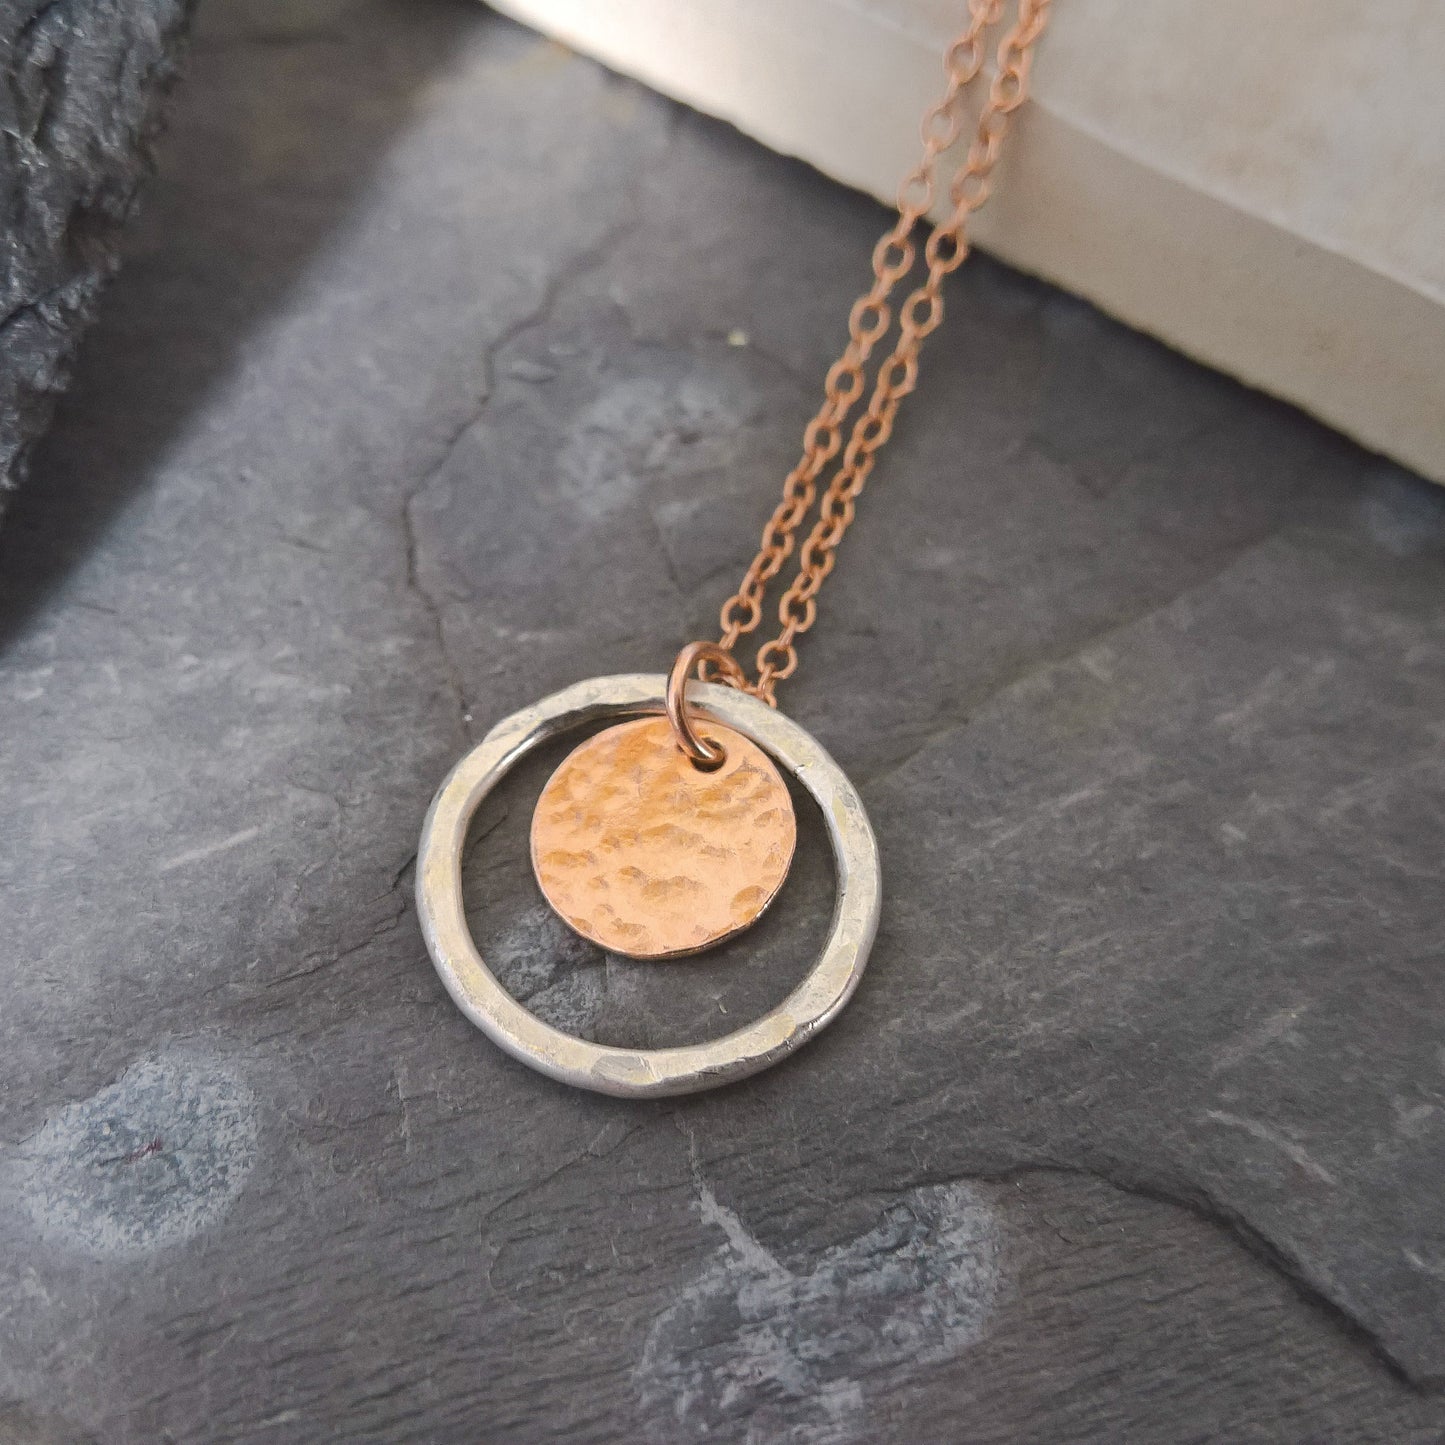 Rose gold circle necklace